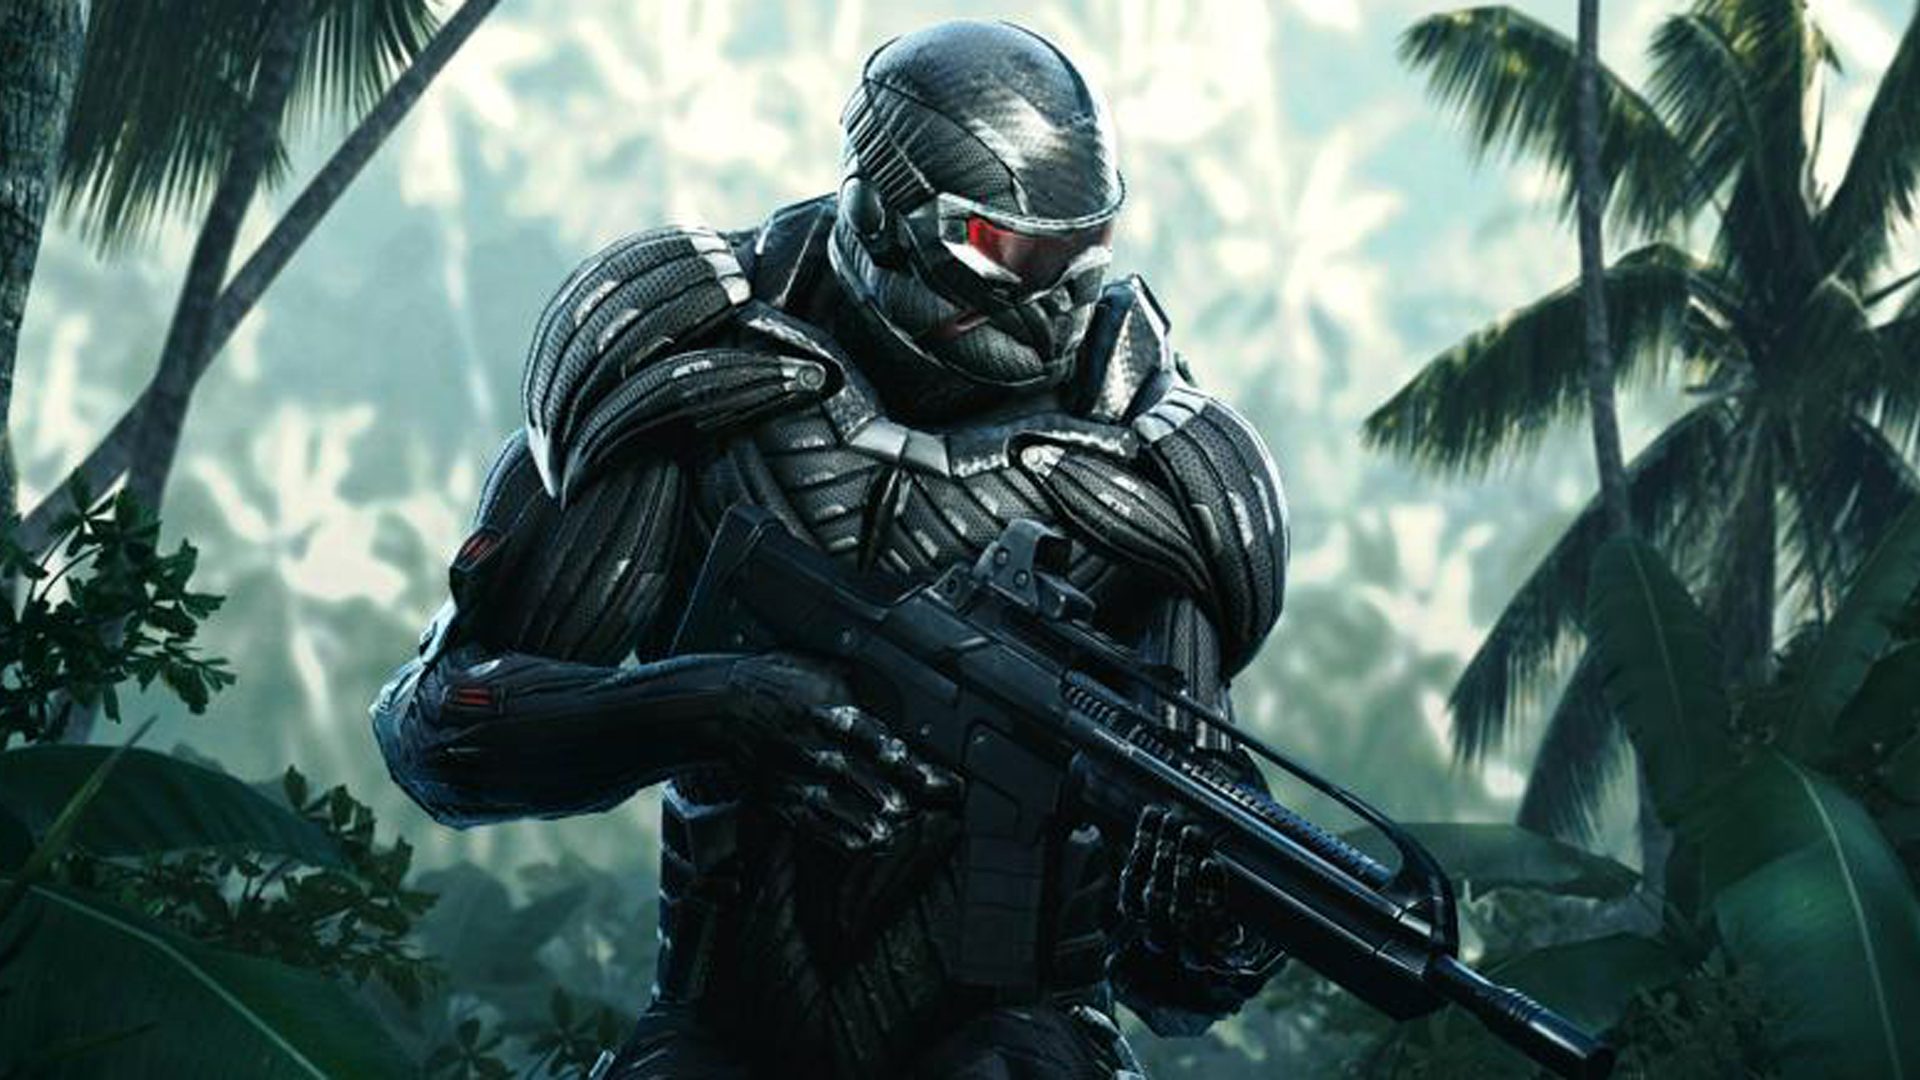 Crysis Remastered arrives on Steam to ‘Mixed’ reviews